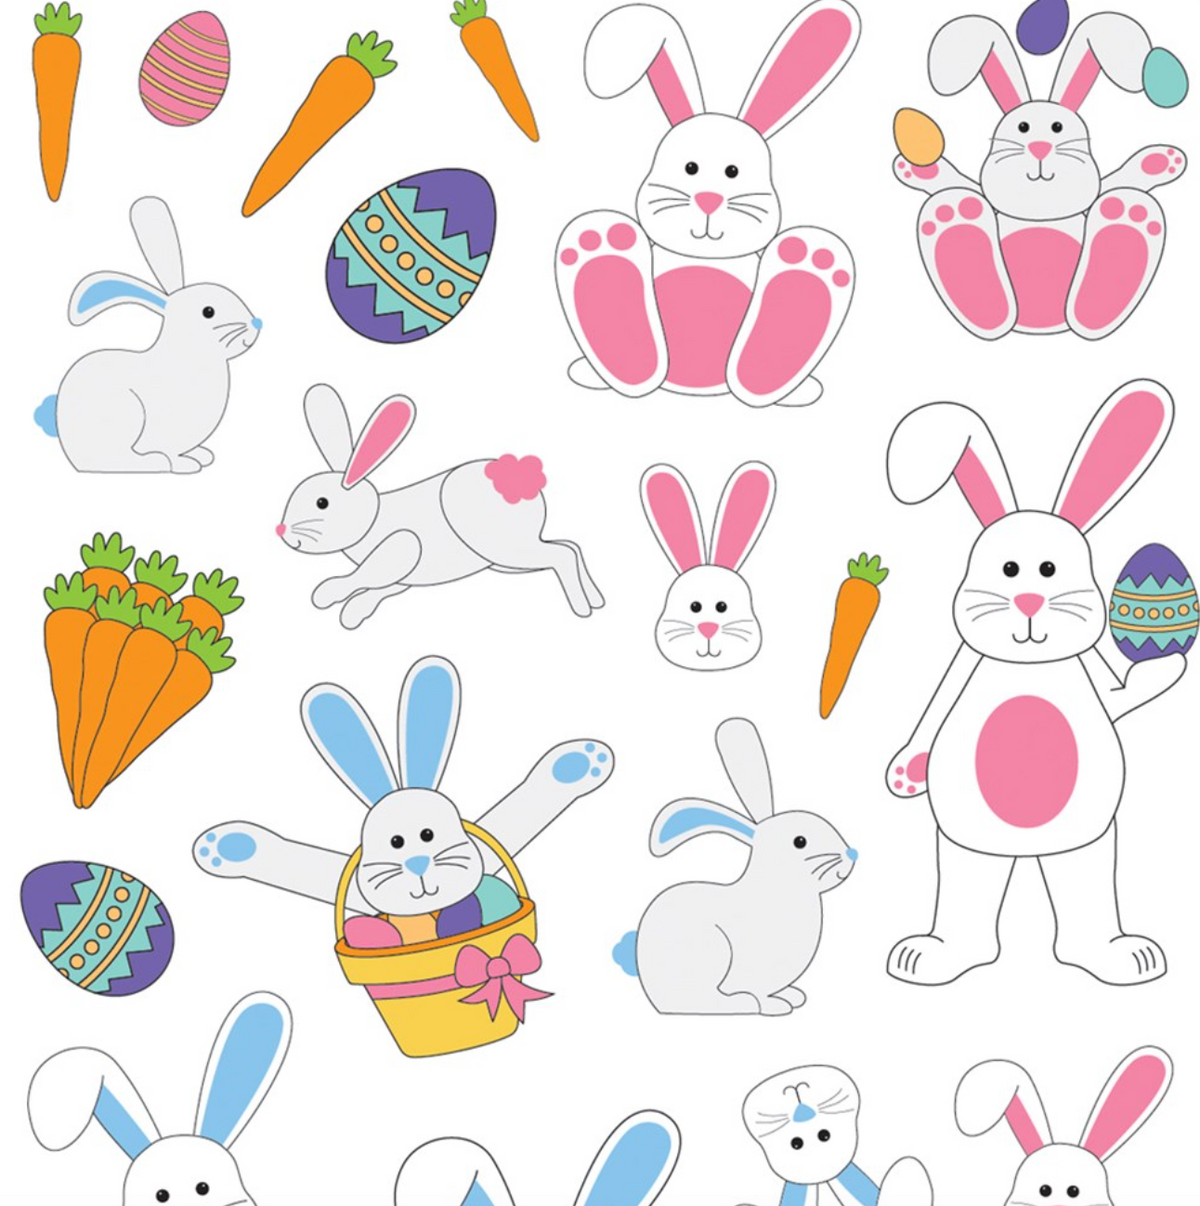 Easter Stickers - Pack of 240